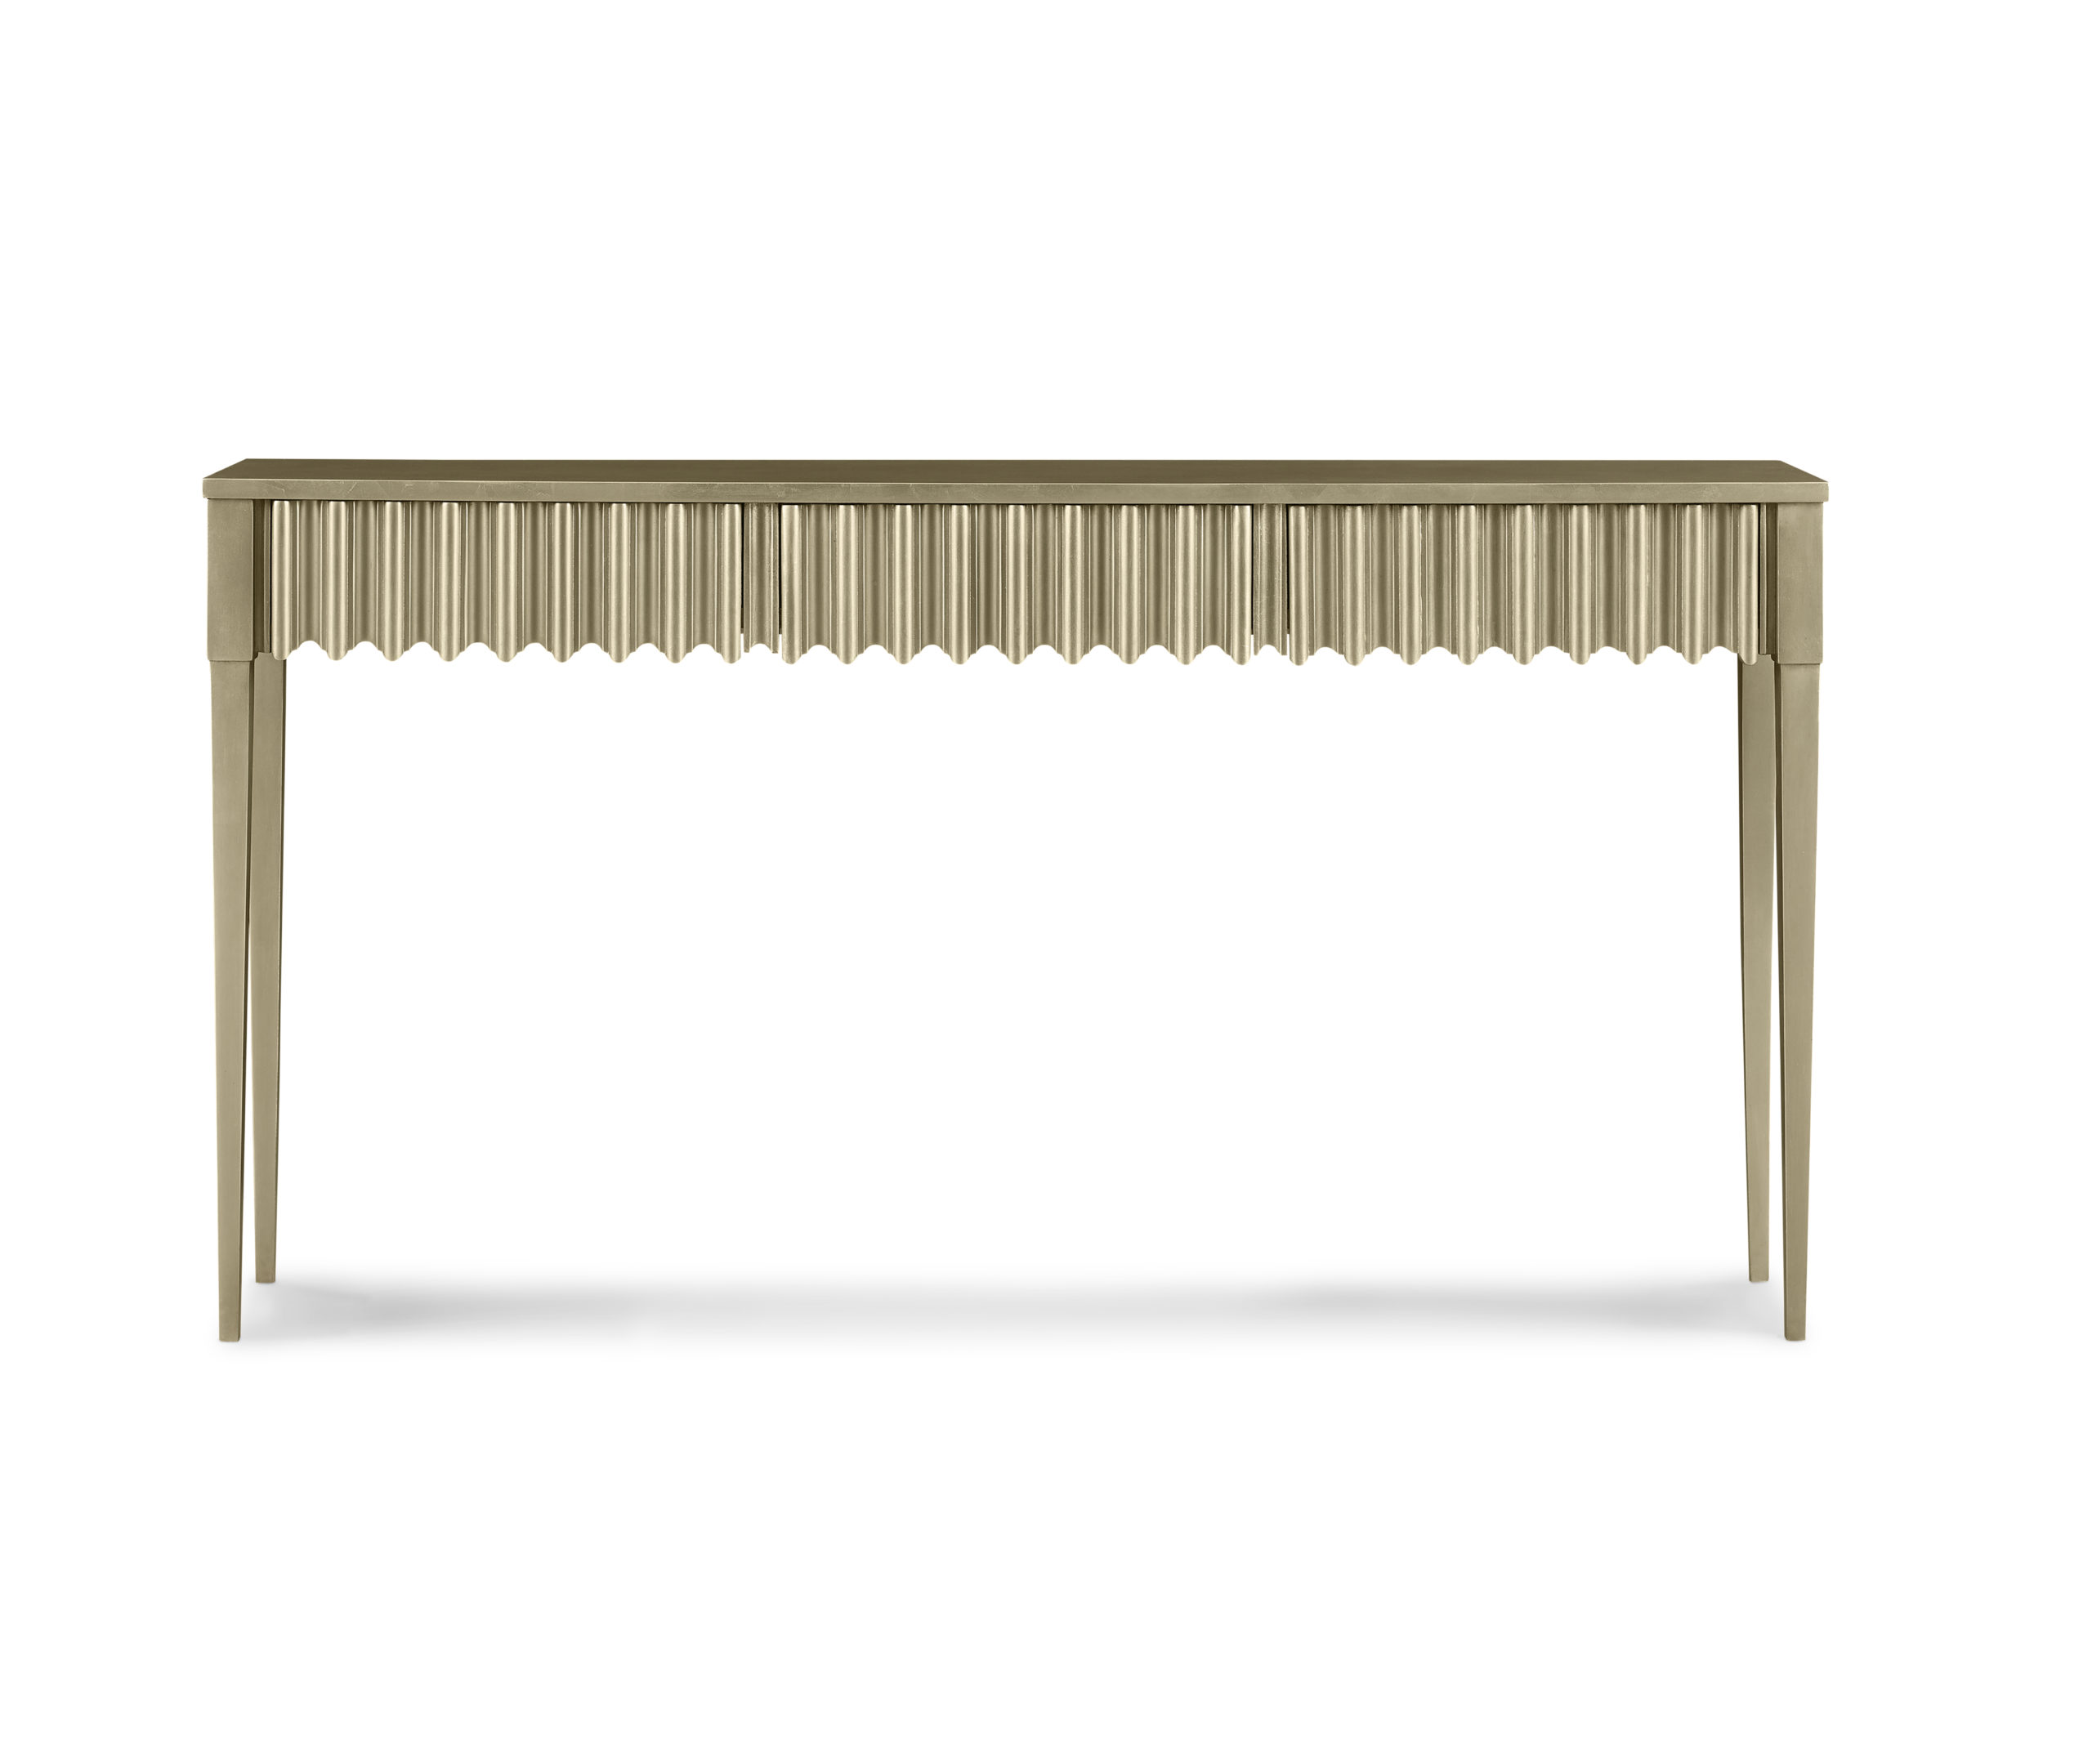 Baker_products_WNWN_reese_console_table_BAA3264_FRONT-scaled-2